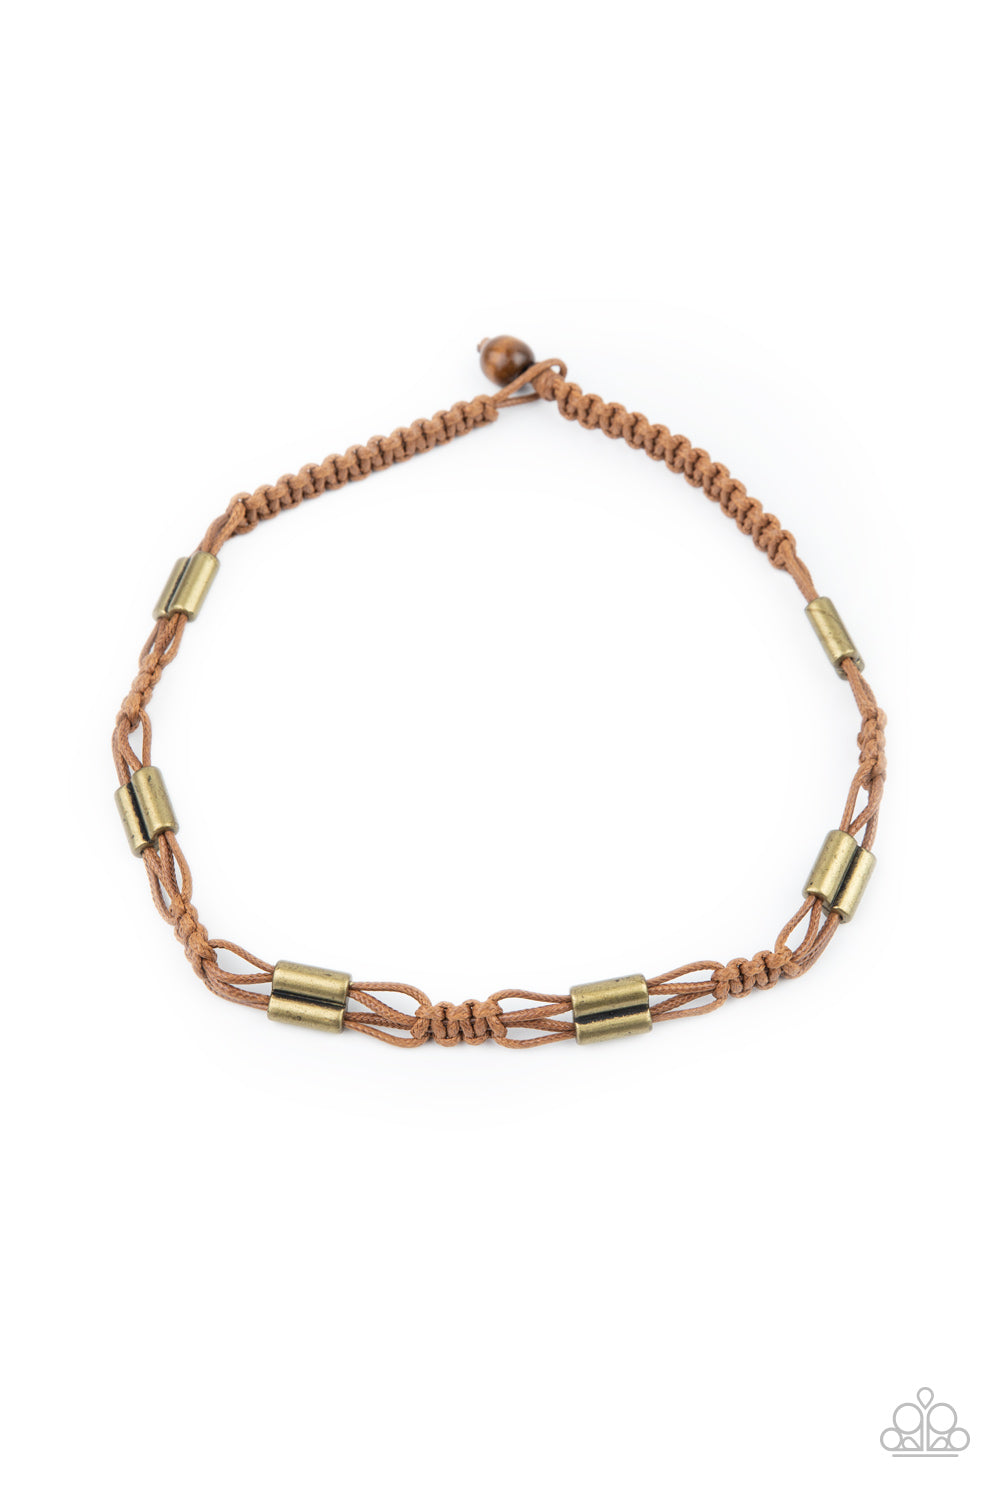 Offshore Drifter - Brown Necklace